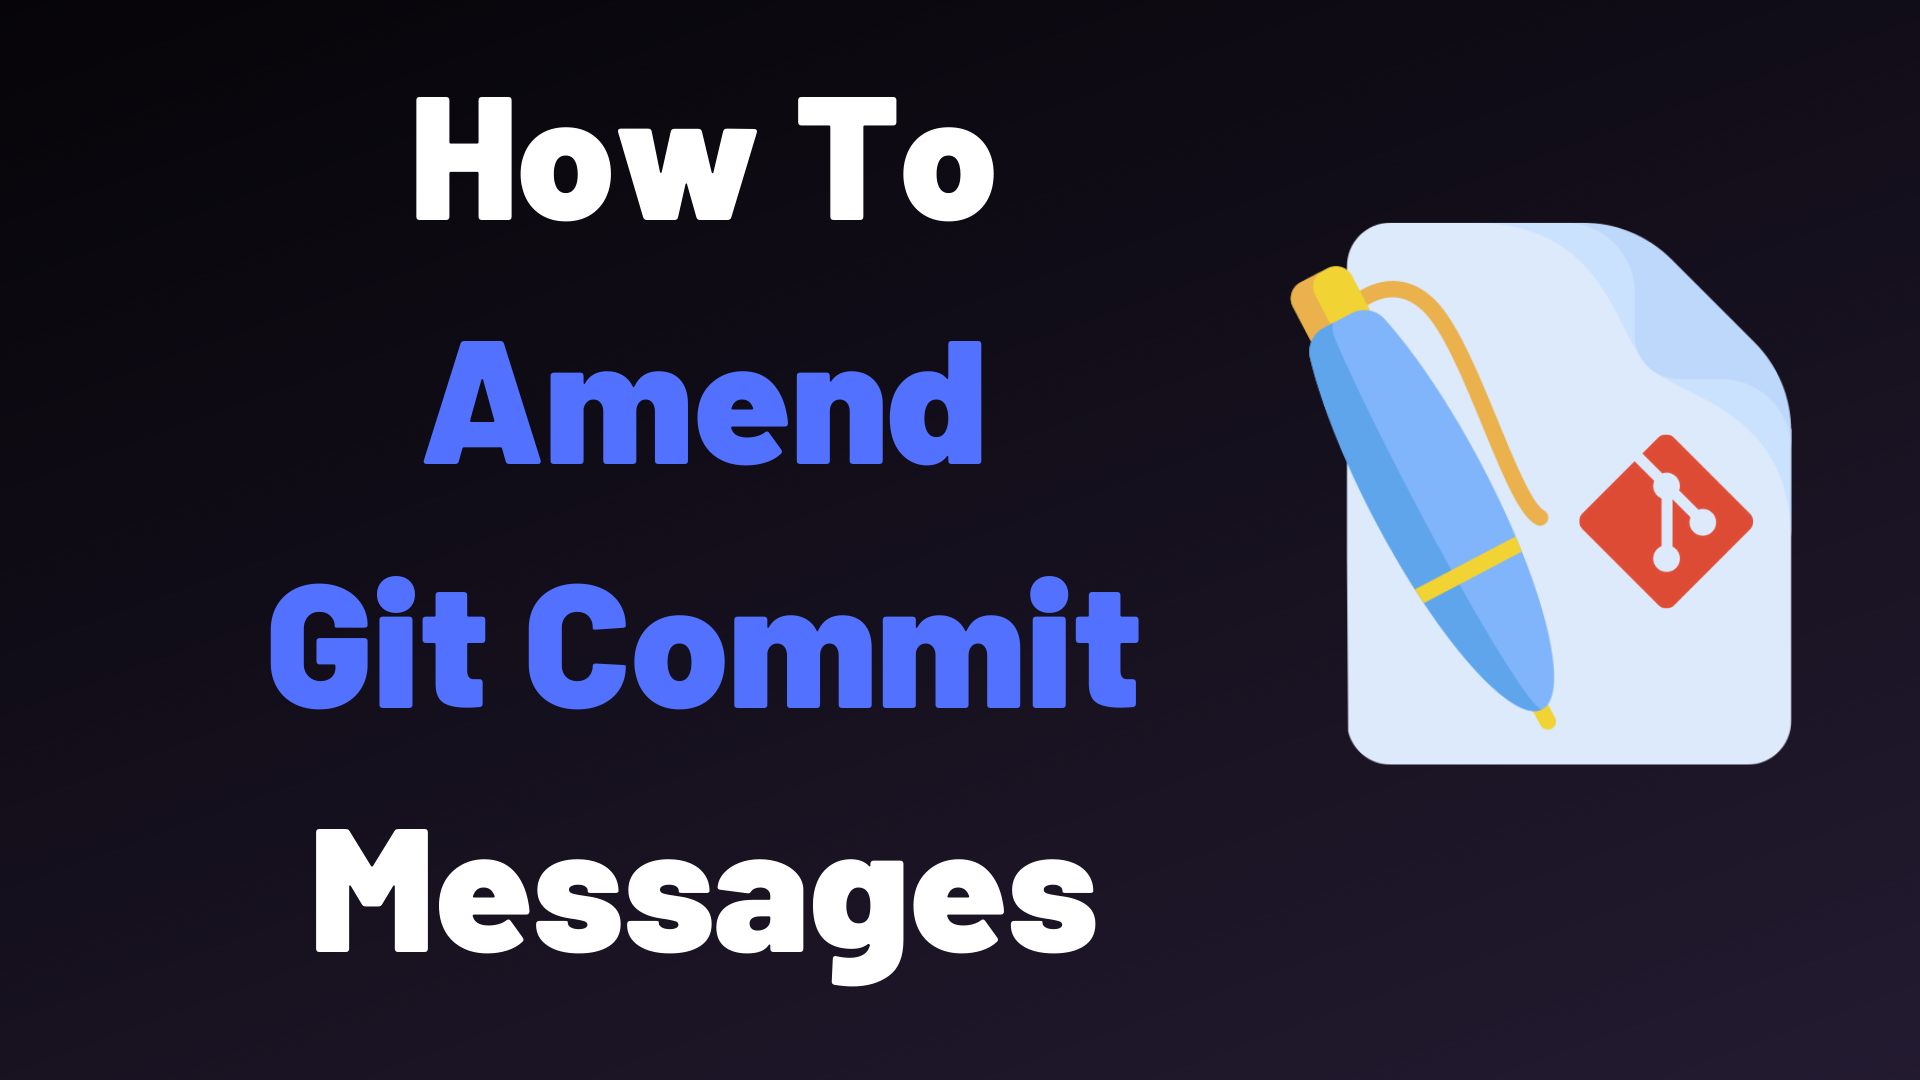 How To Amend Git Commit Message